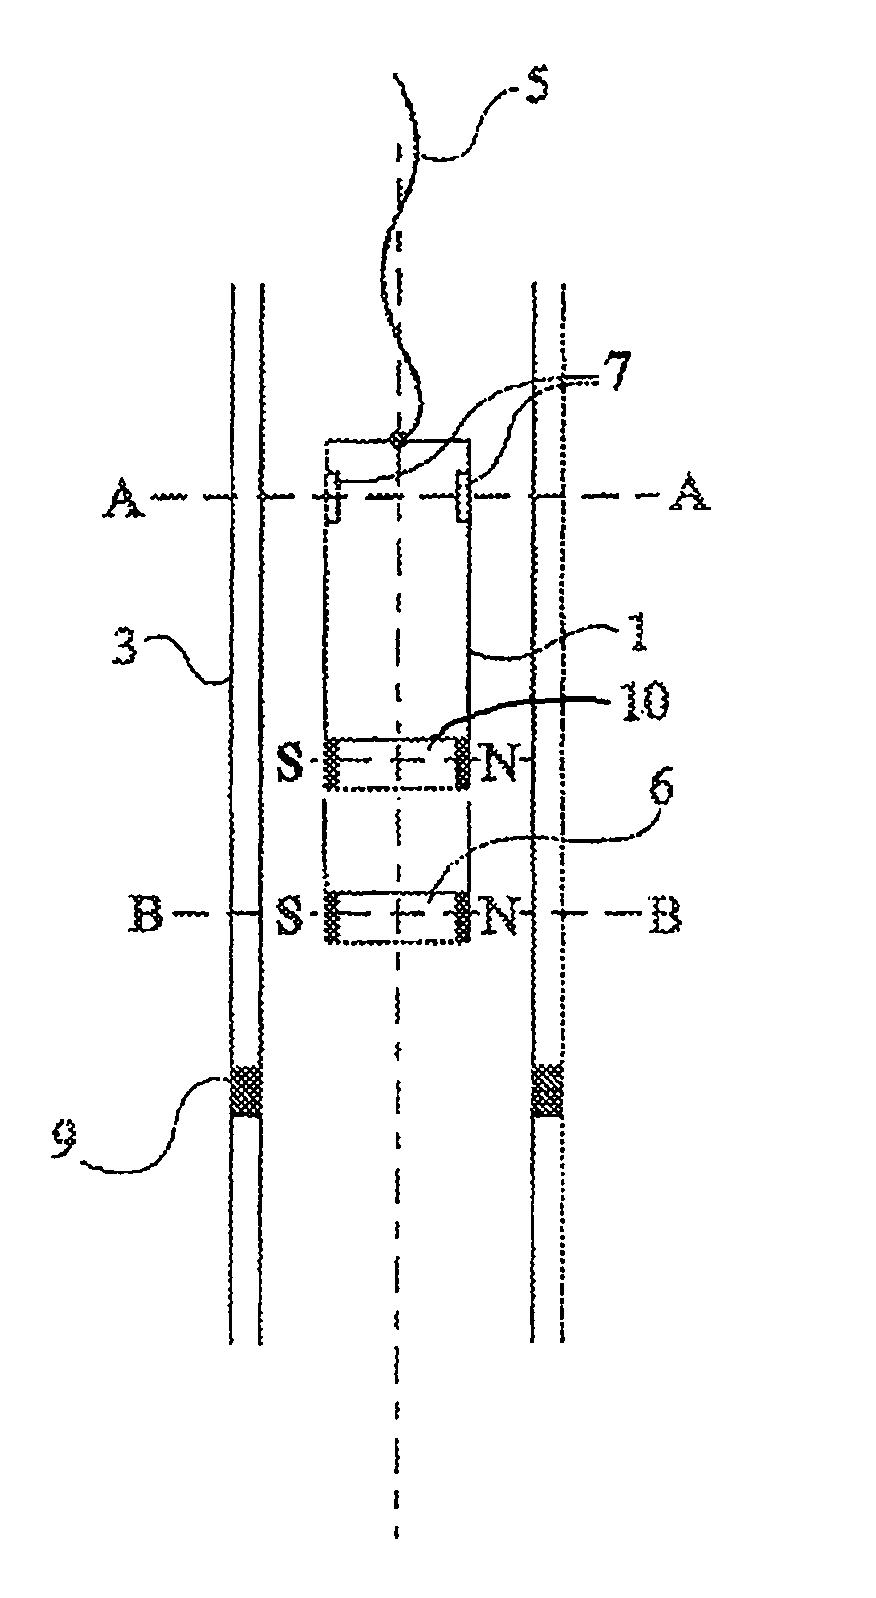 Probe for analysis of a string of rods or tubes in a well